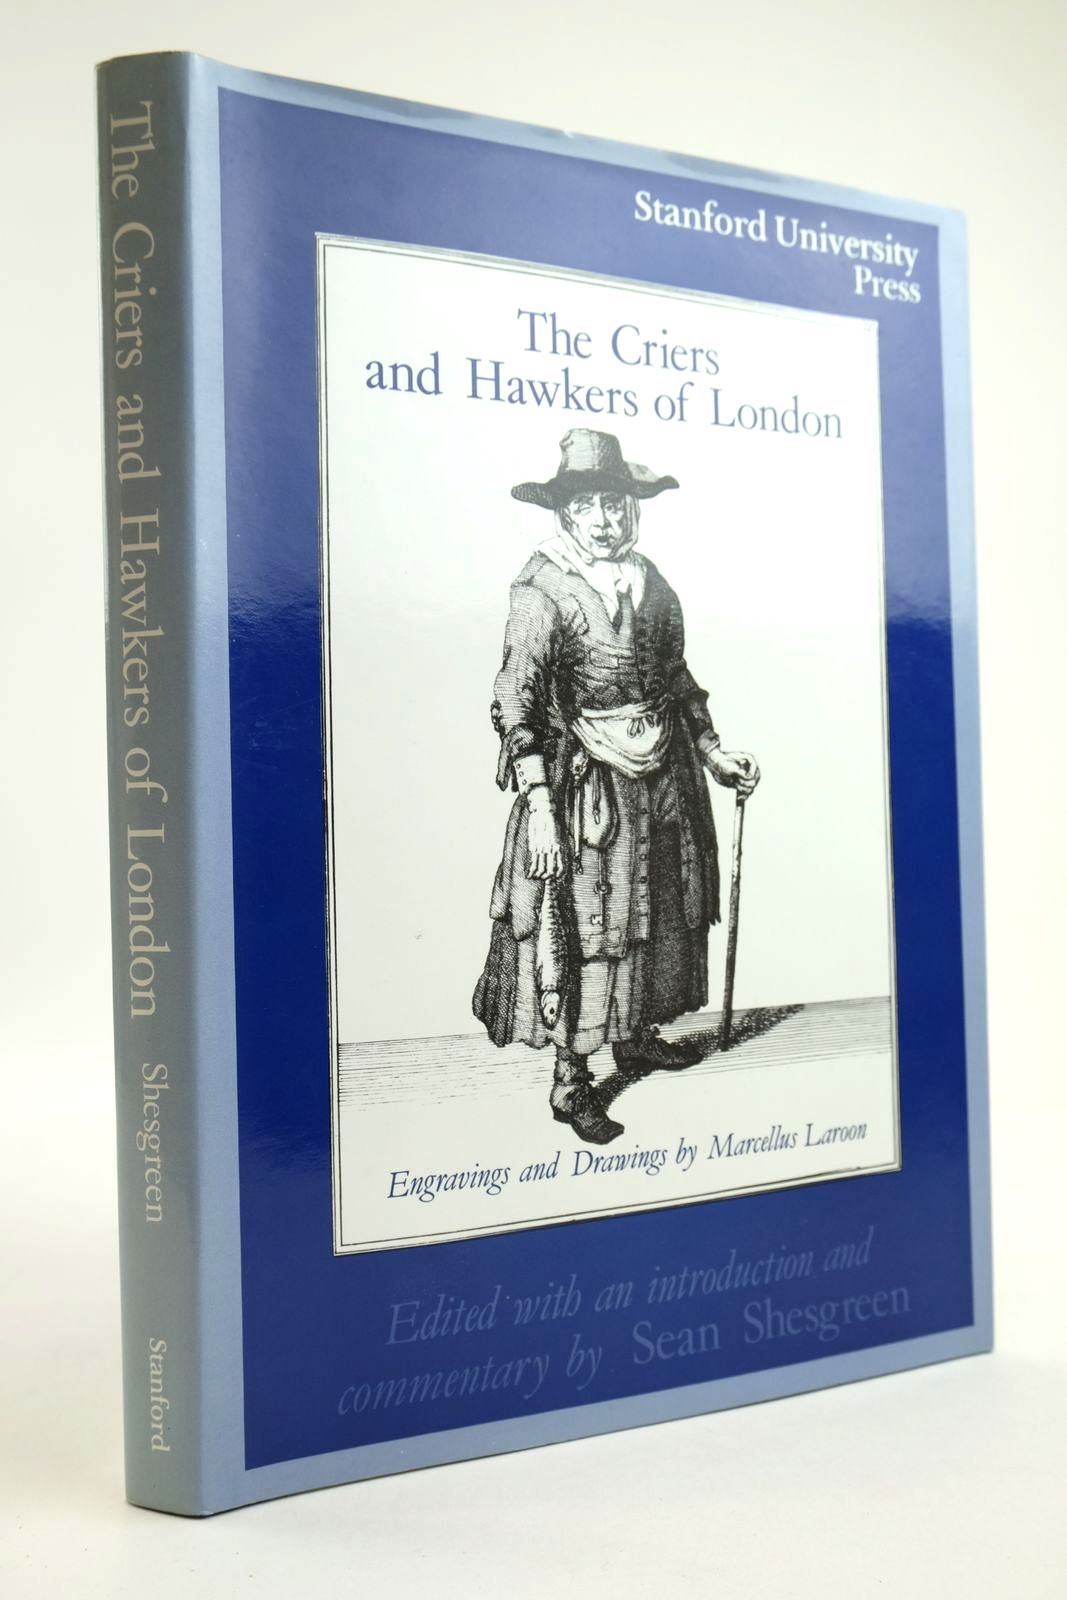 Photo of THE CRIERS AND HAWKERS OF LONDON written by Shesgreen, Sean illustrated by Laroon, Marcellus published by Stanford University Press (STOCK CODE: 2134152)  for sale by Stella & Rose's Books